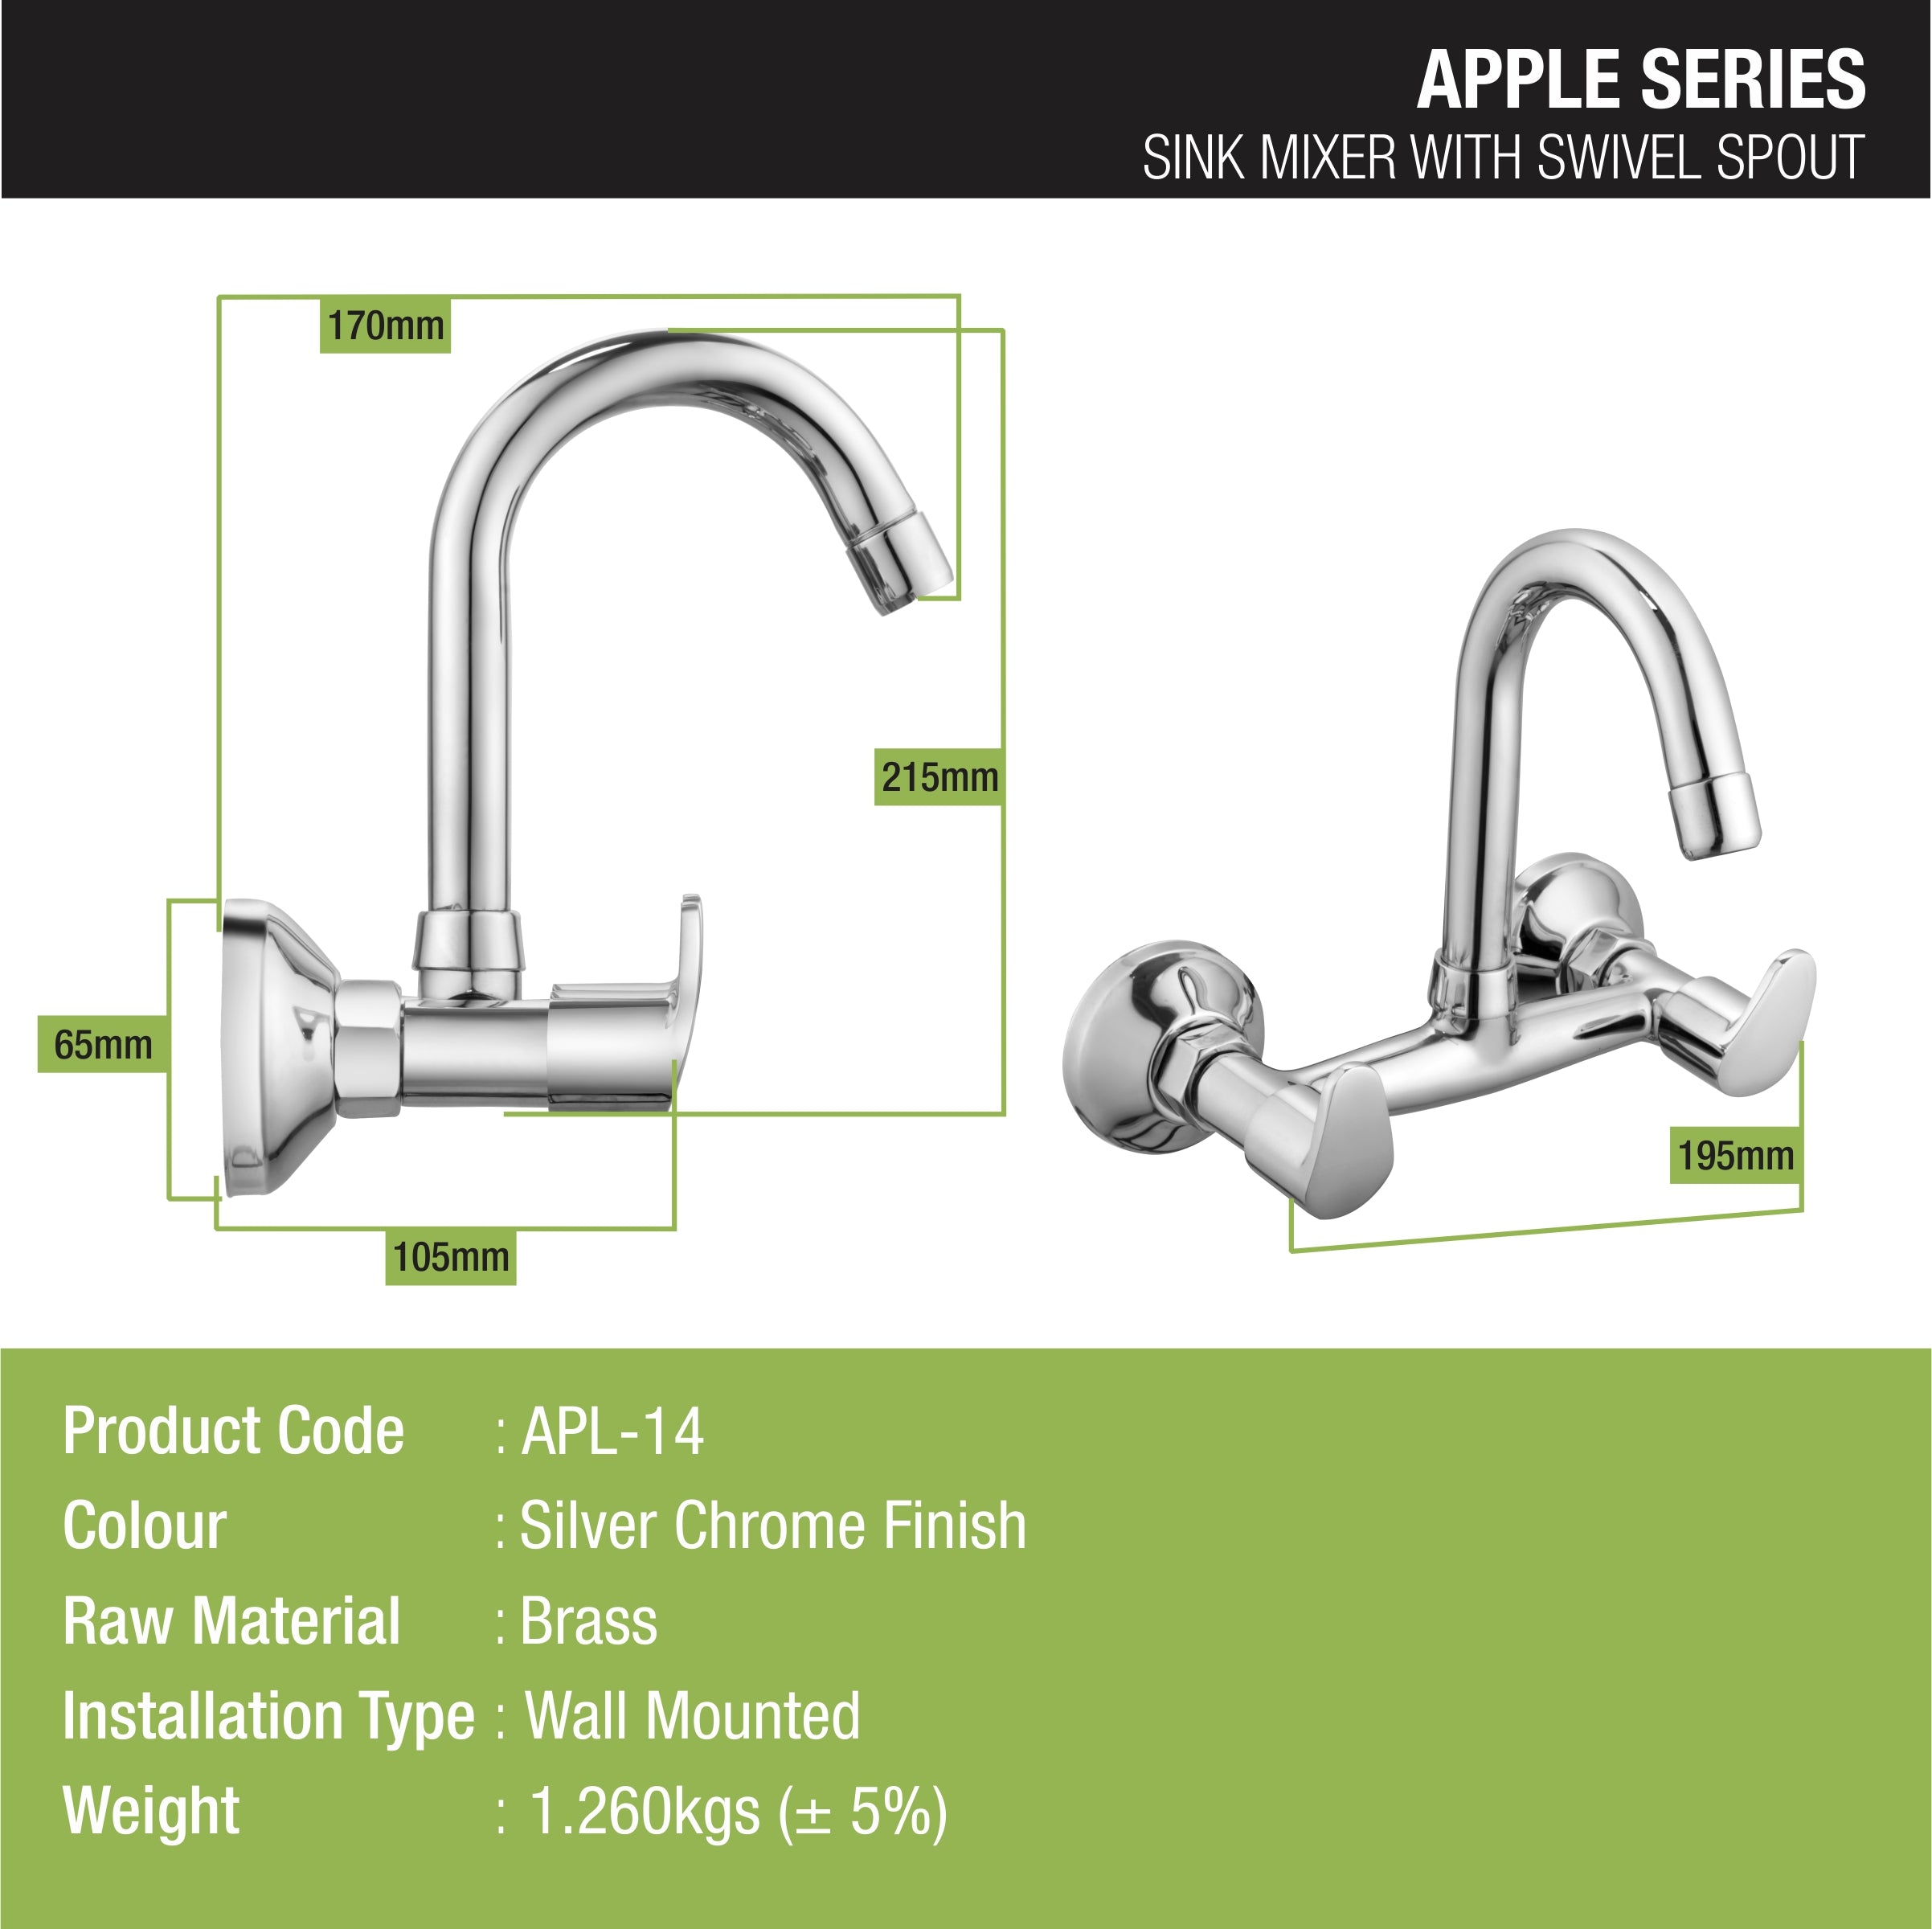 Apple Sink Mixer with Swivel Spout Faucet sizes and dimensions 